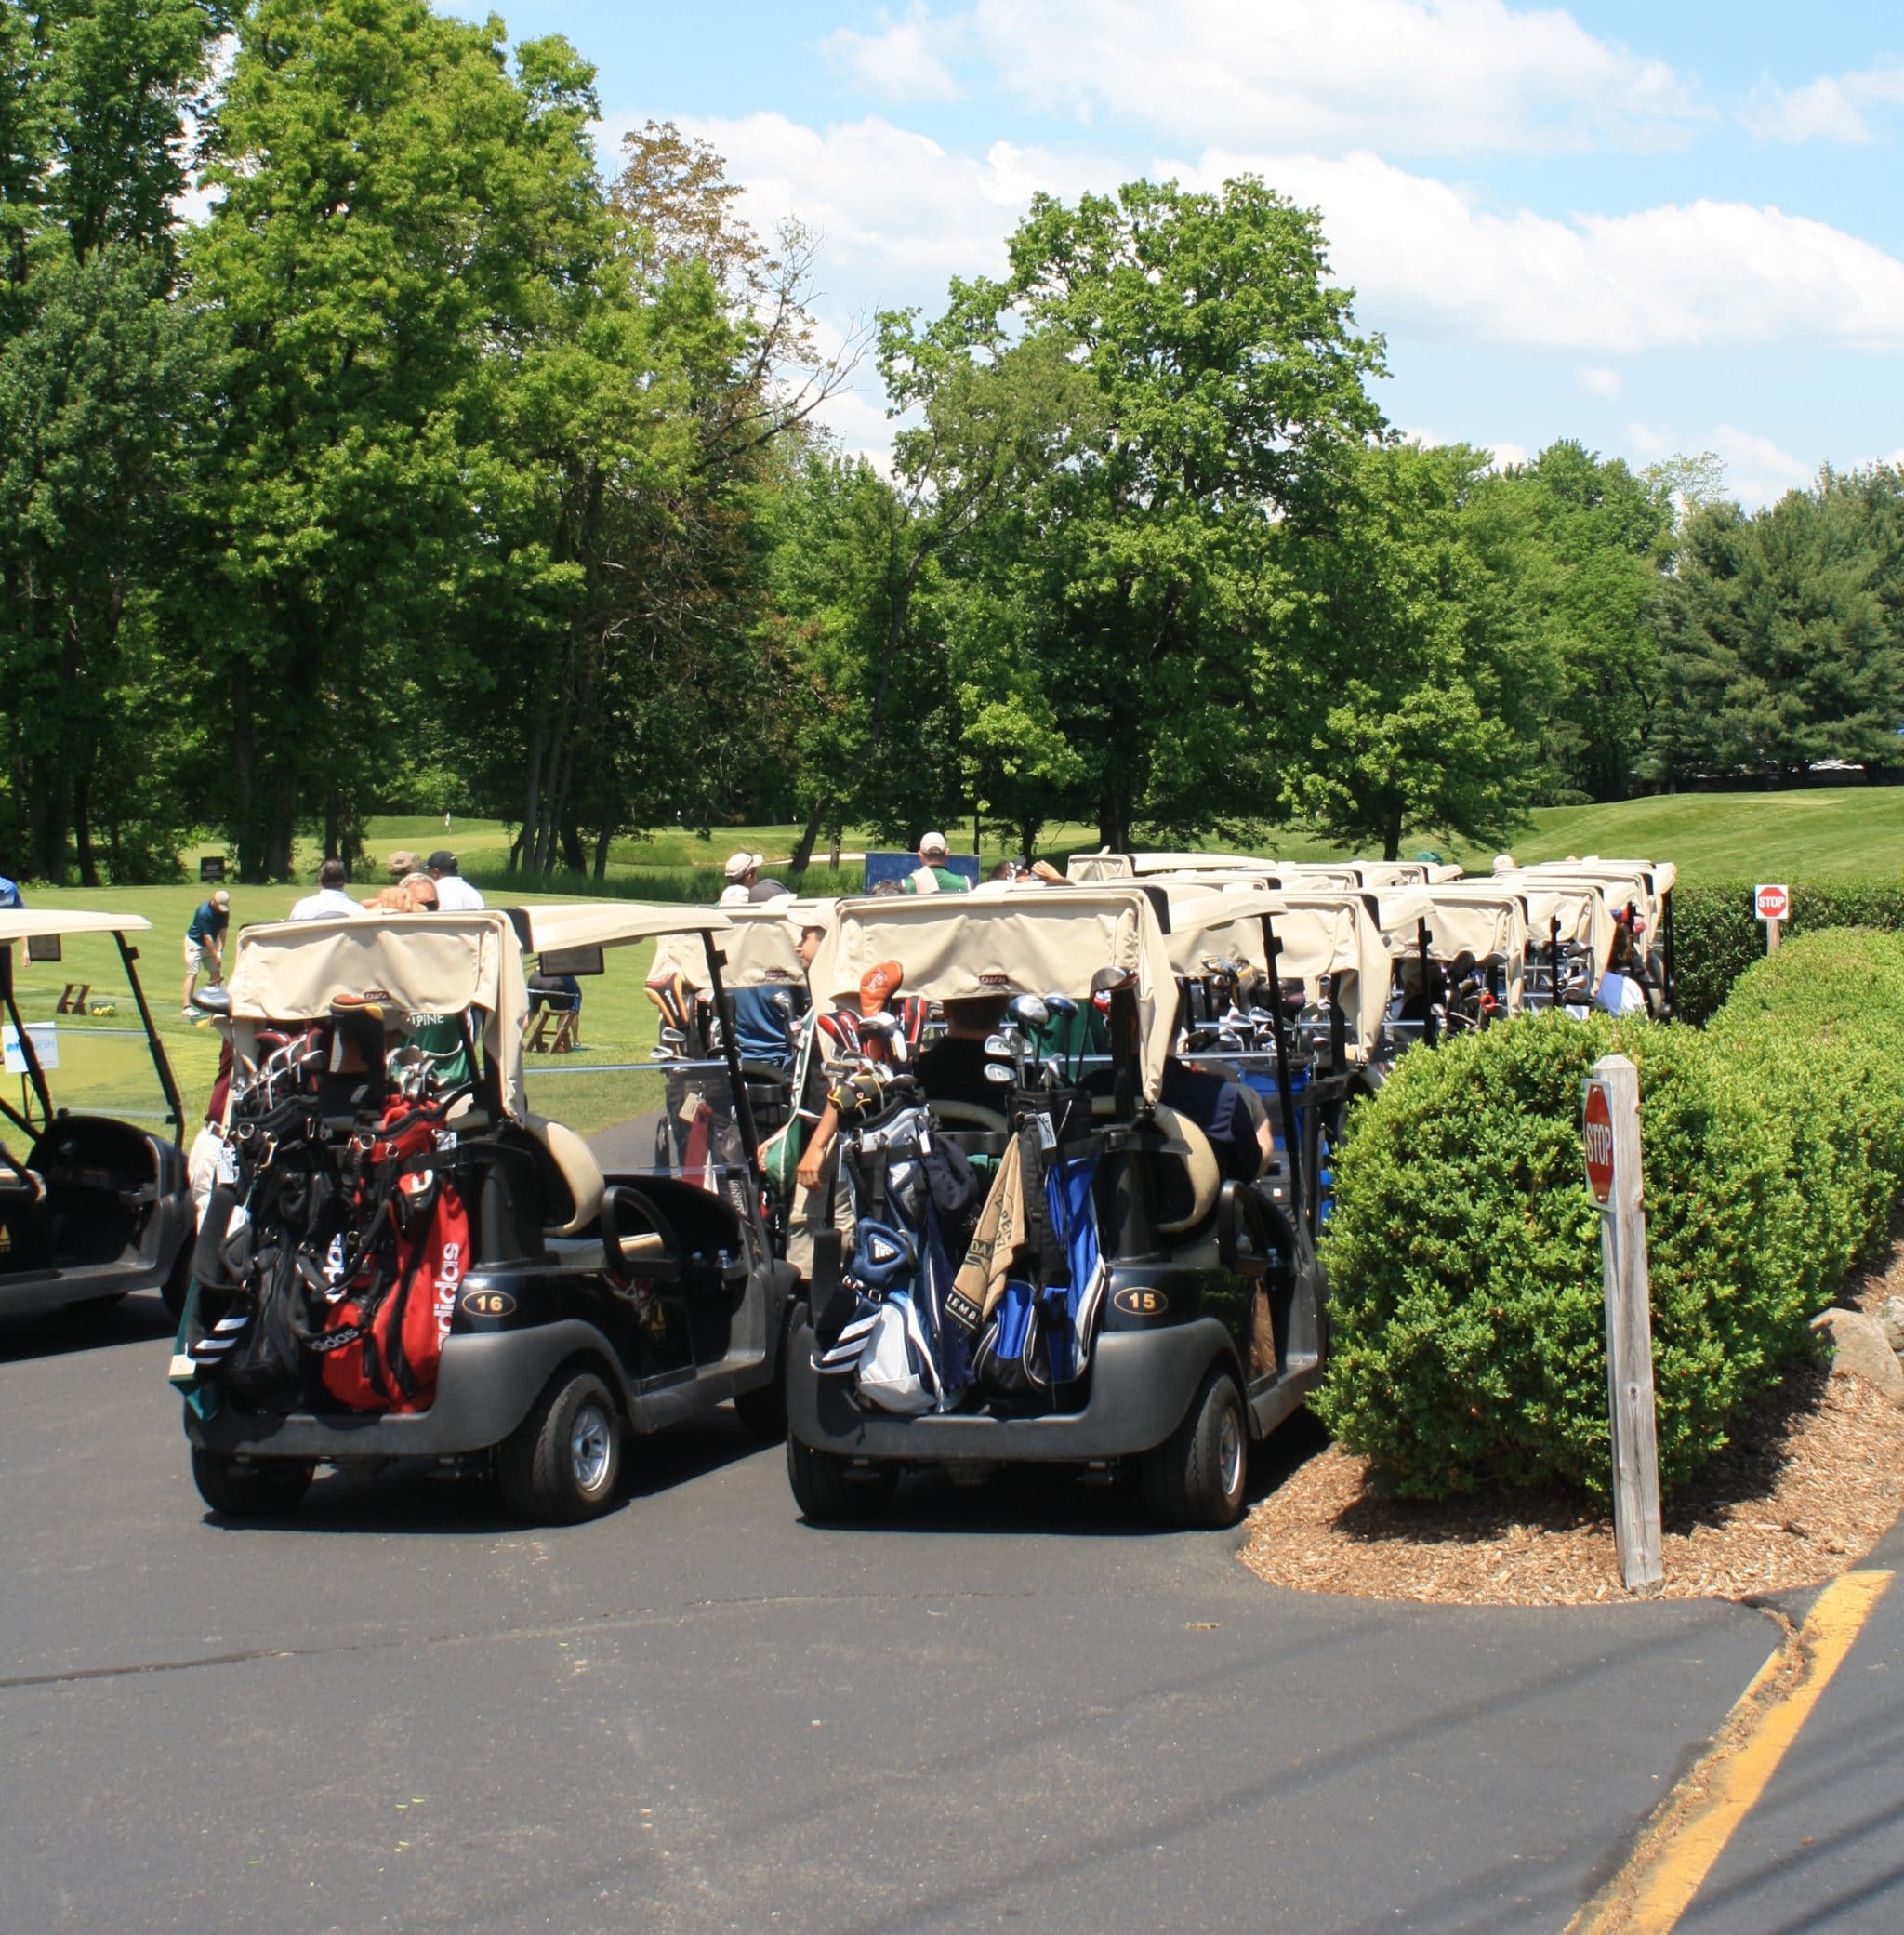 May 23, 2016-Community Options’ Spring Golf Classic at Alpine Country Club, Demarest, NJ